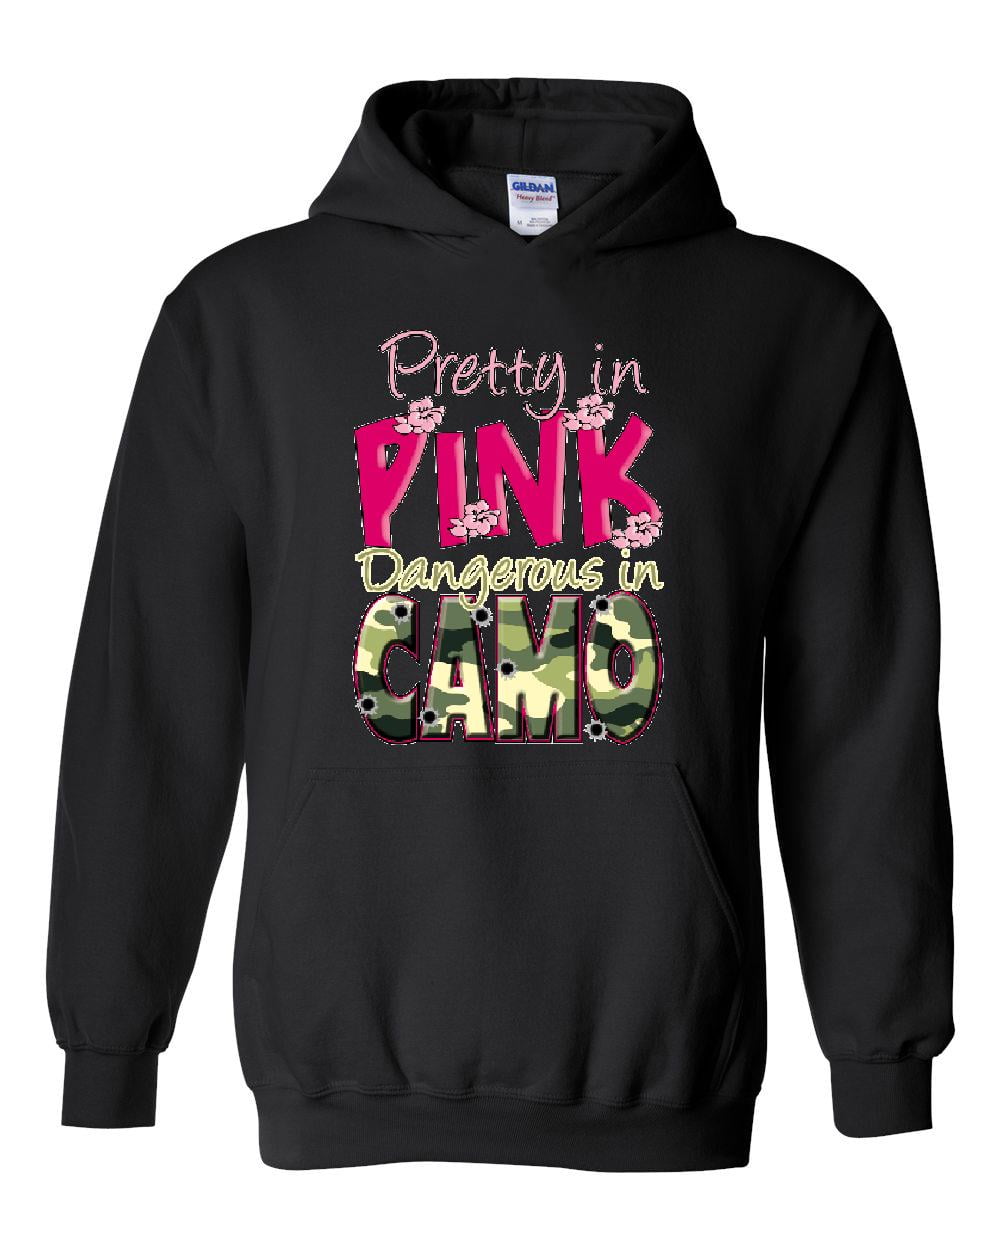 PRETTY IN PINK/DANGEROUS IN CAMO Ladies Hoodie SIZE SM To 3XL 